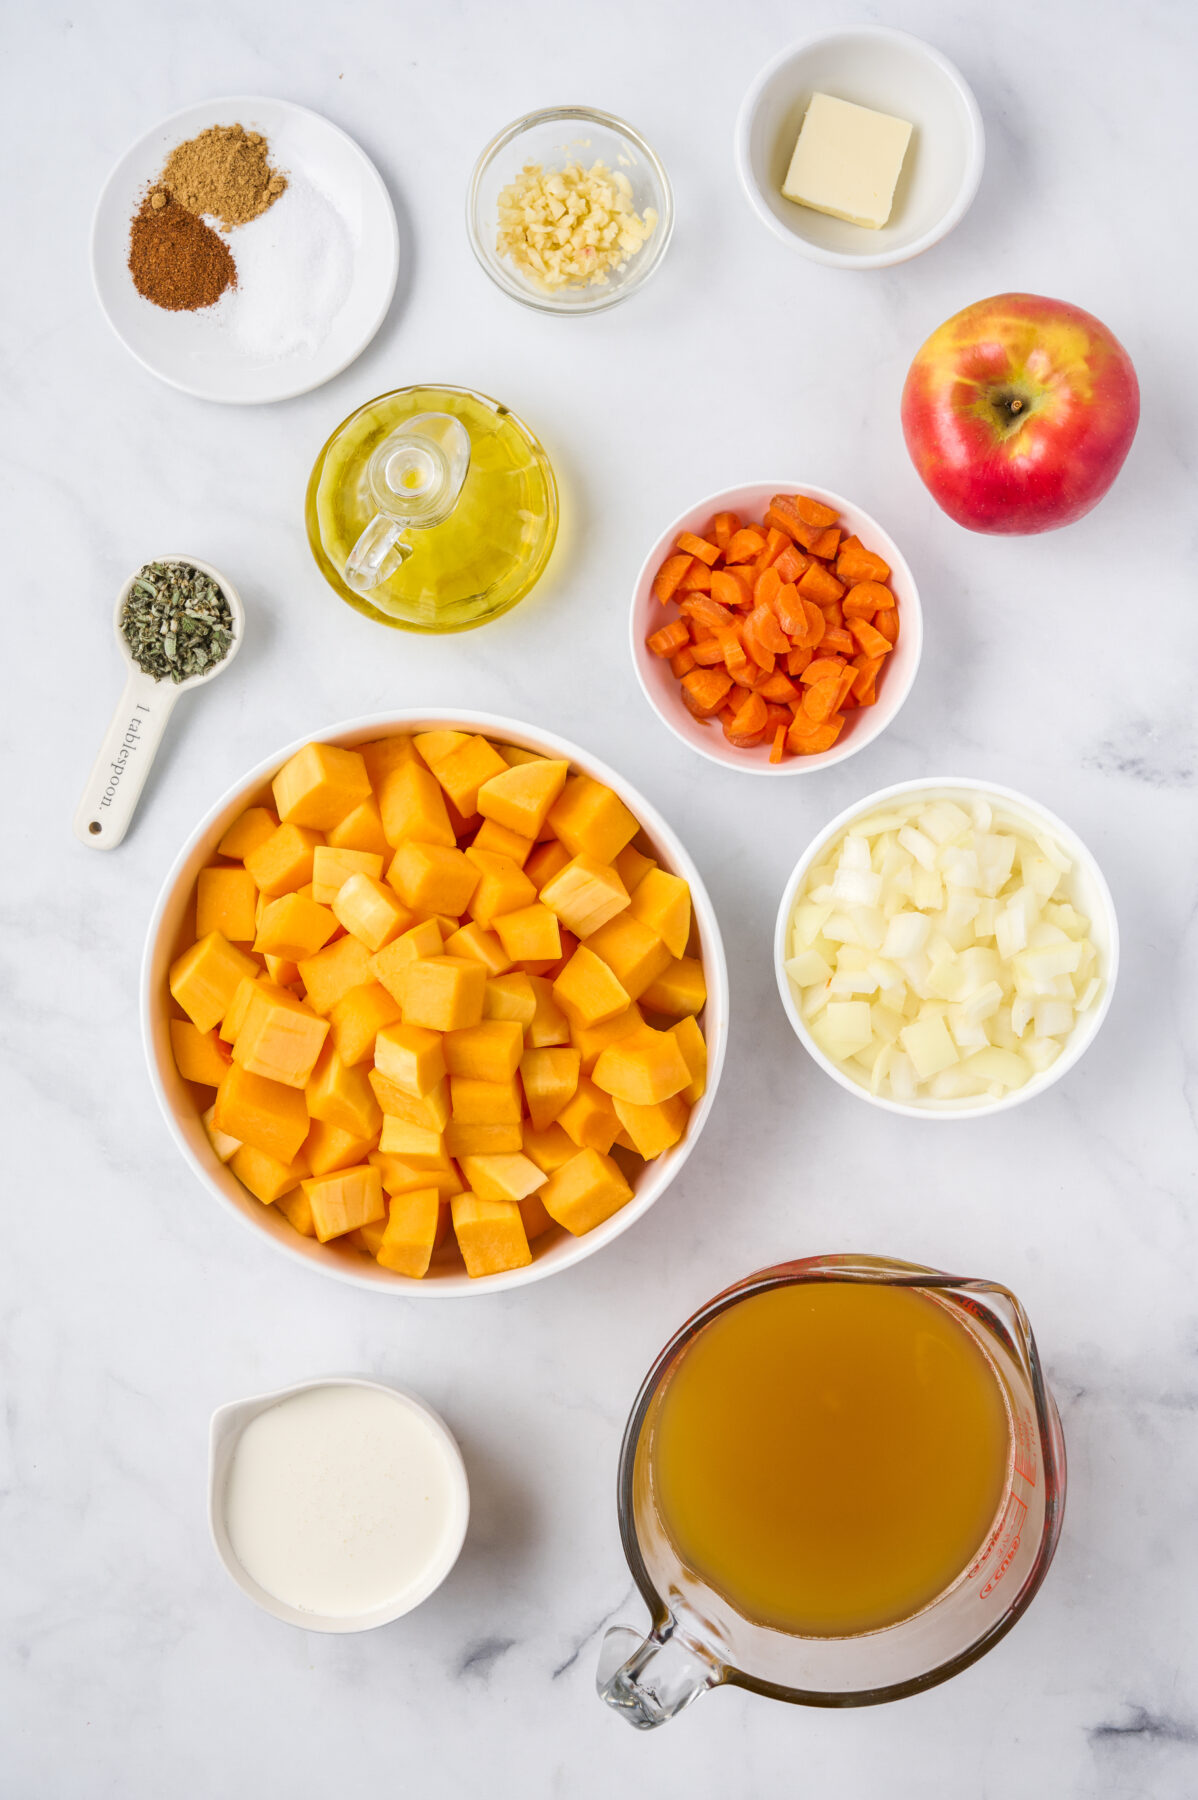 About the Ingredients for Apple Butternut Squash Soup.